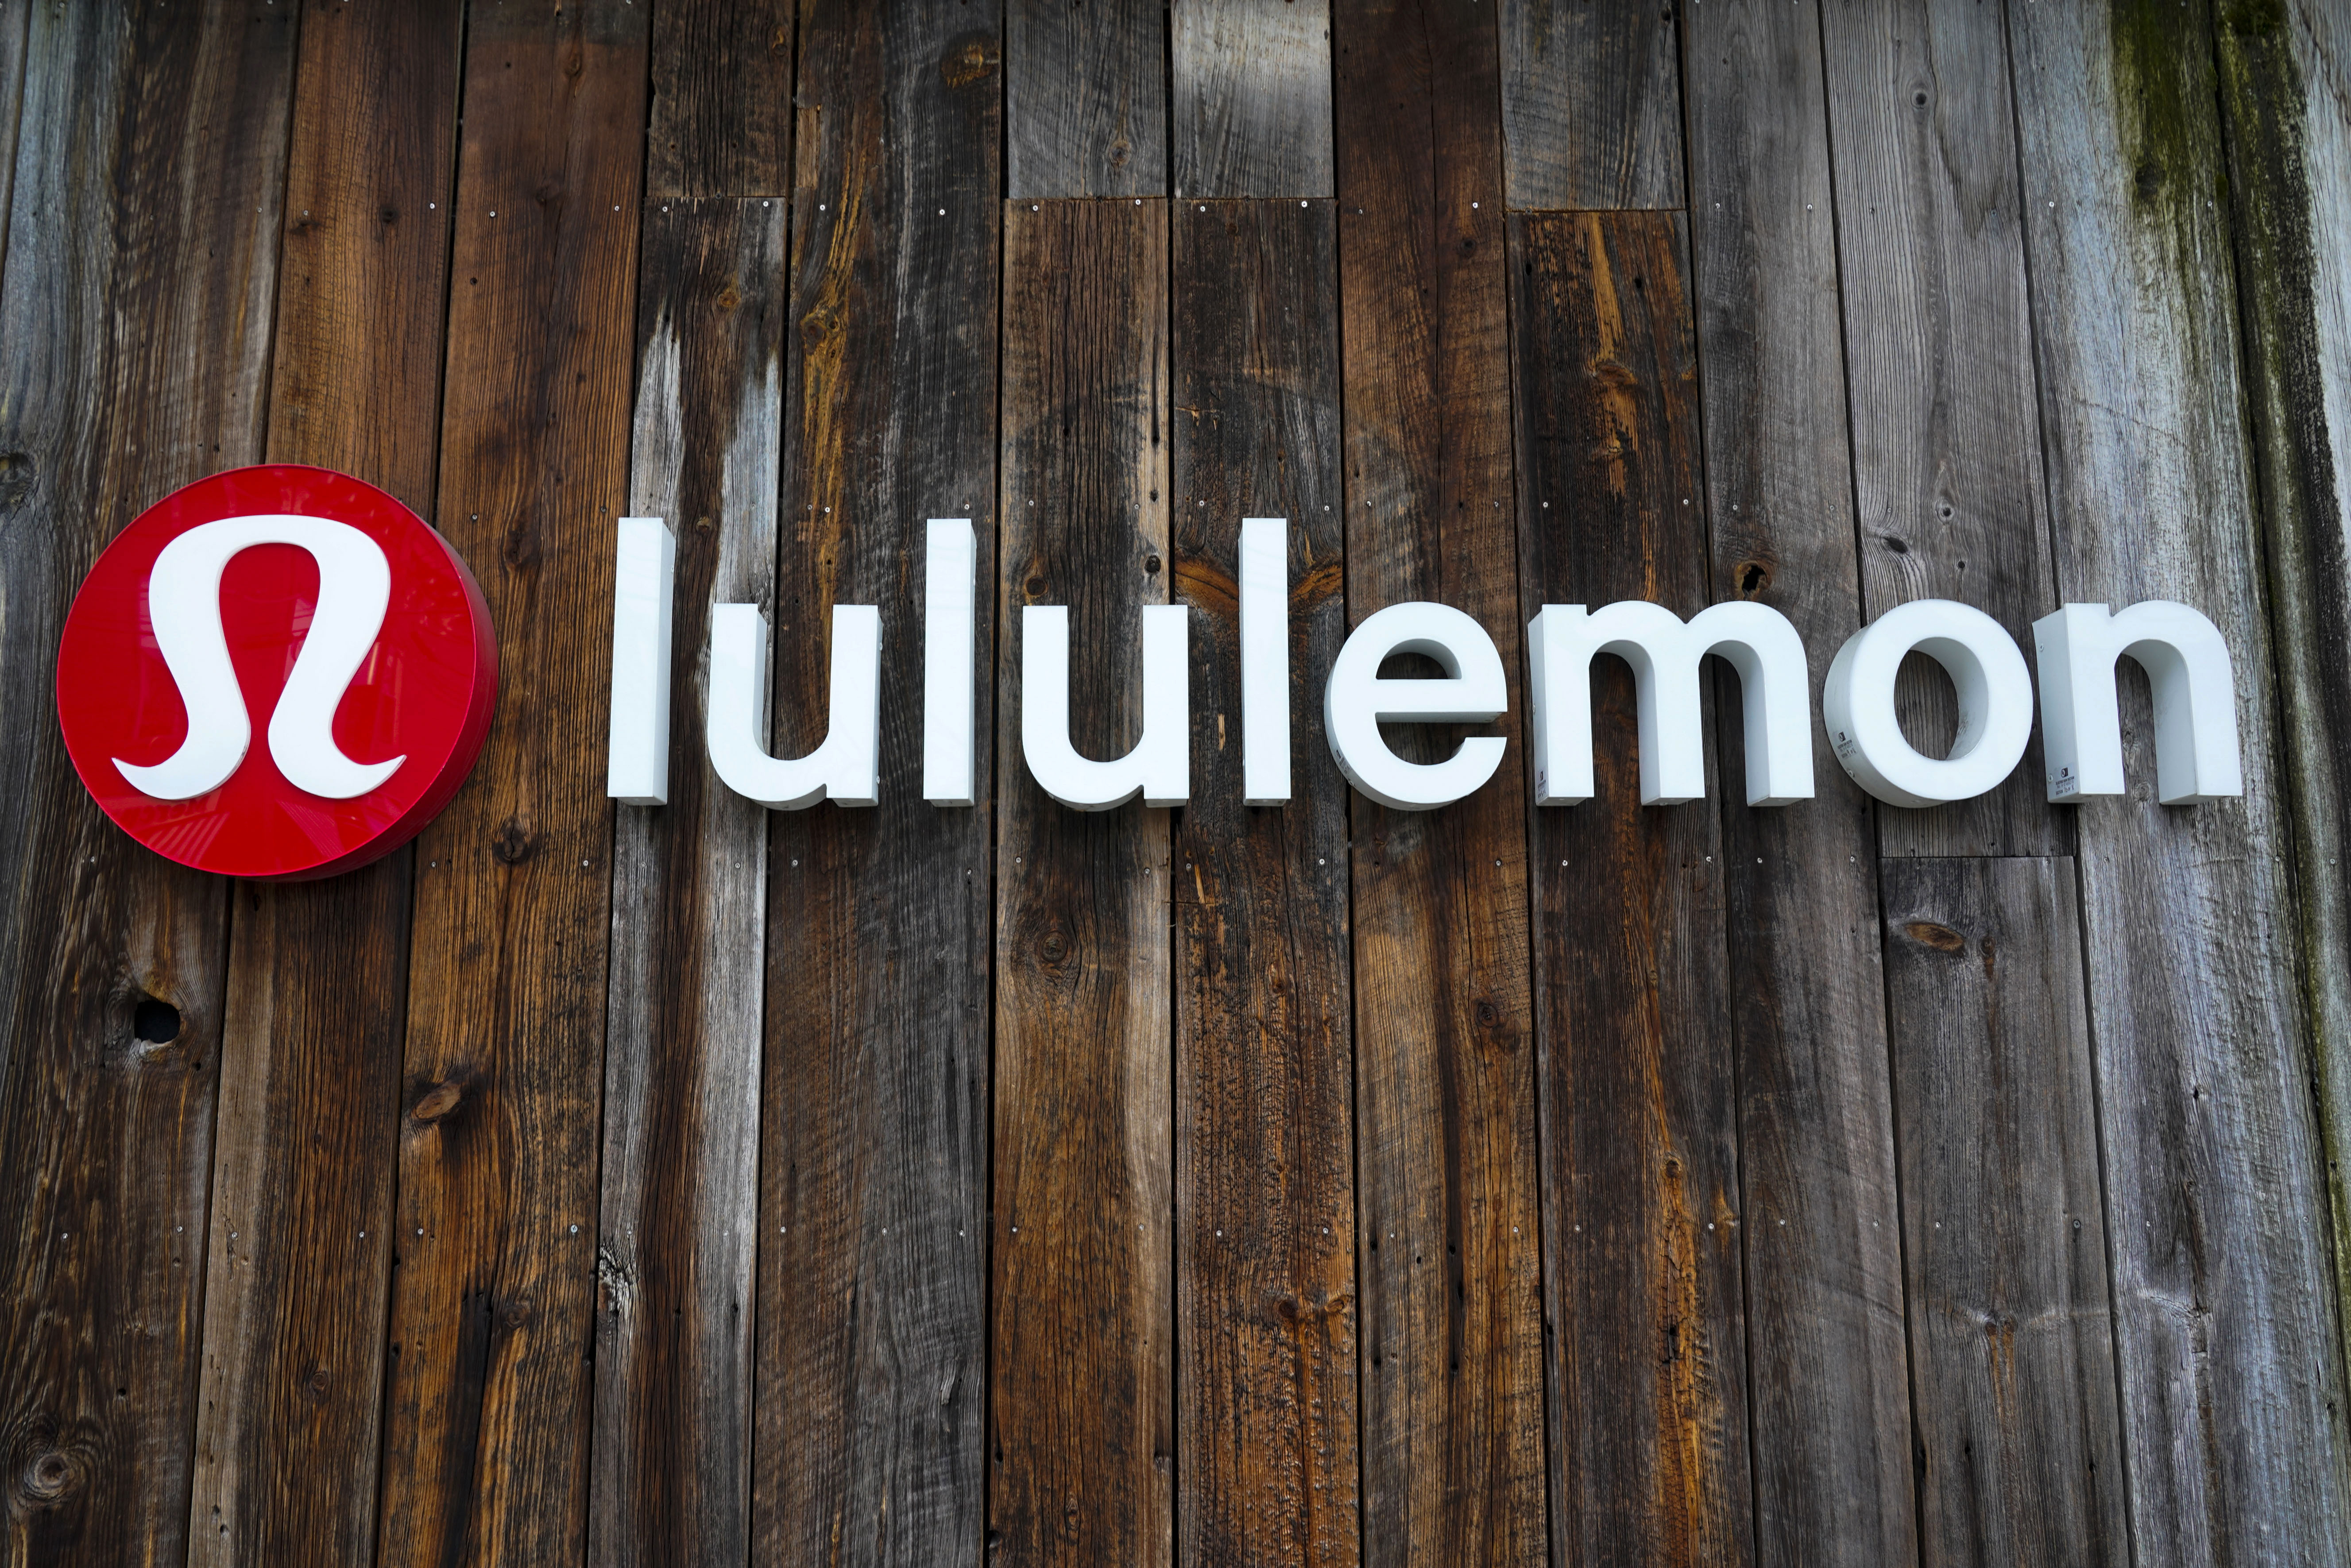 5 lululemon dupes from  that are worth a look! I've tested